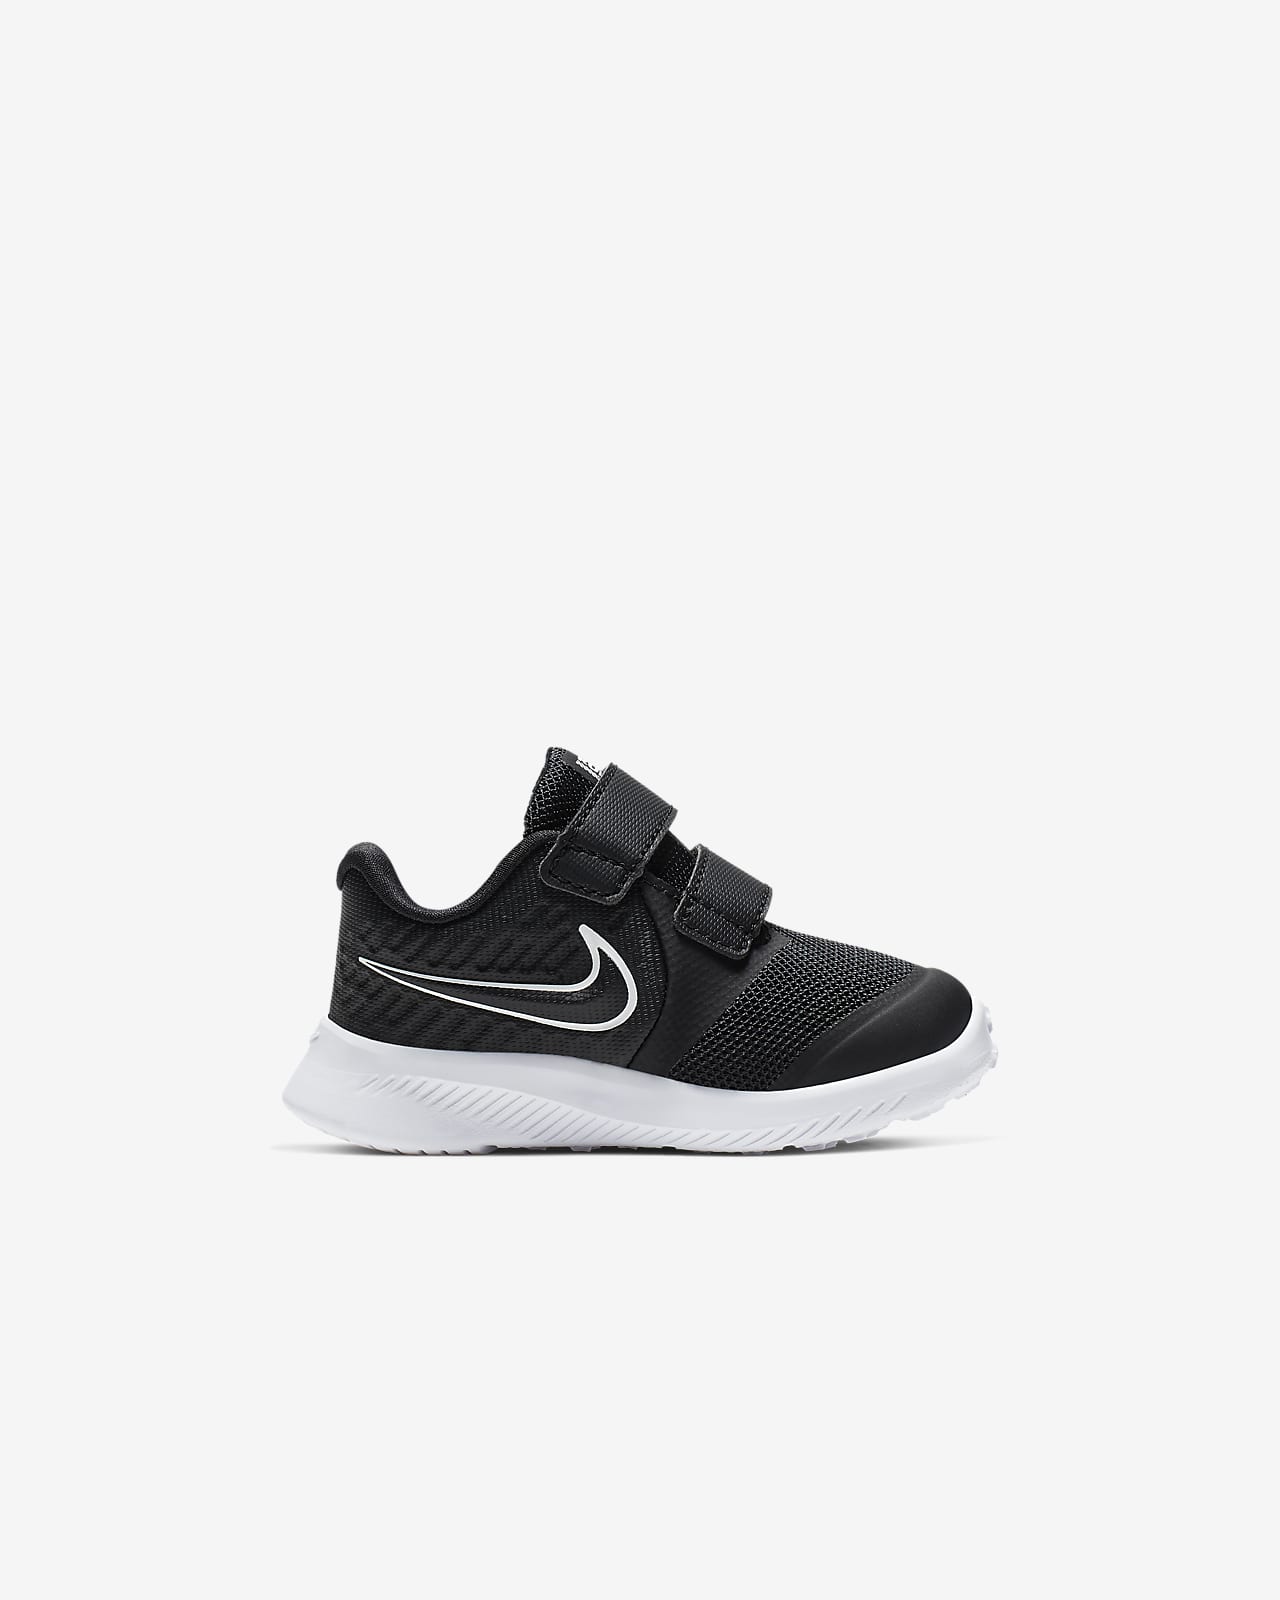 nike star runner 2 toddlers shoes